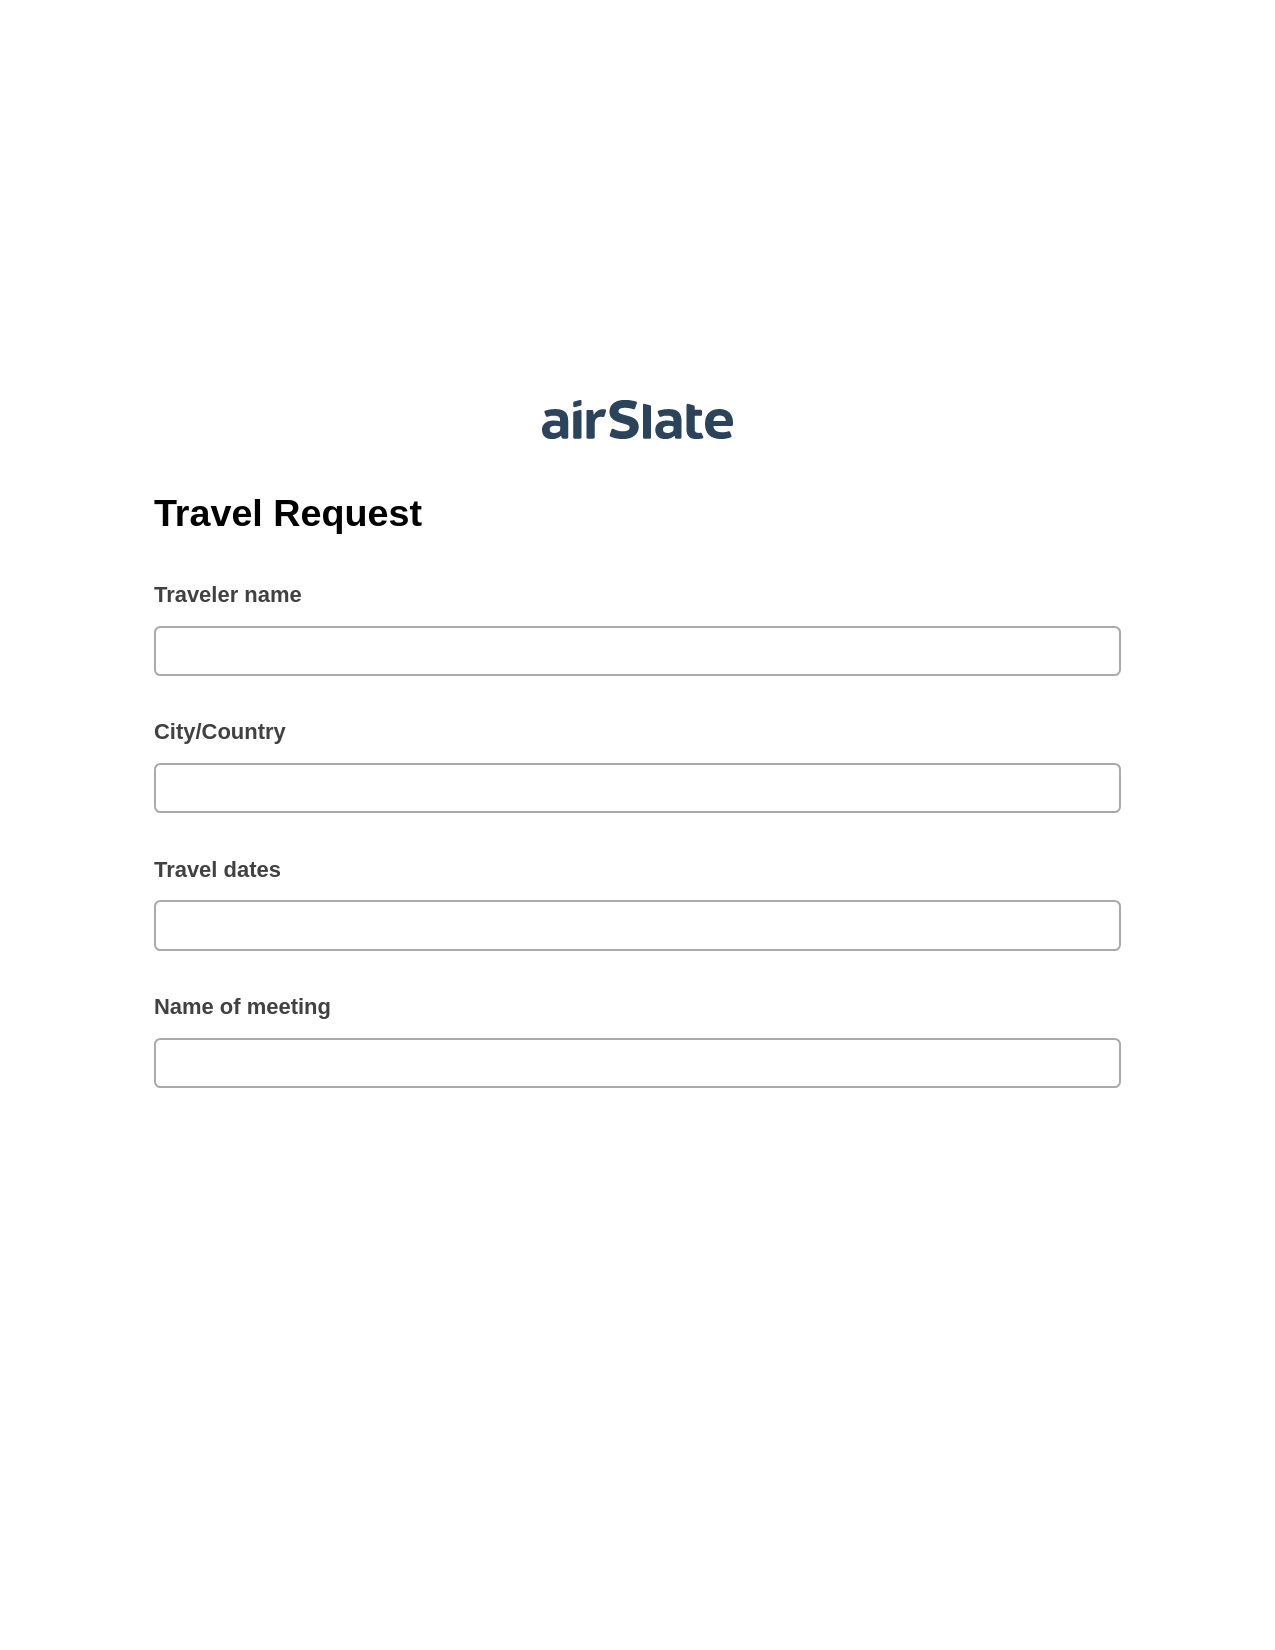 Travel Request Pre-fill Slate from MS Dynamics 365 Records Bot, Export to MS Dynamics 365 Bot, Export to Smartsheet